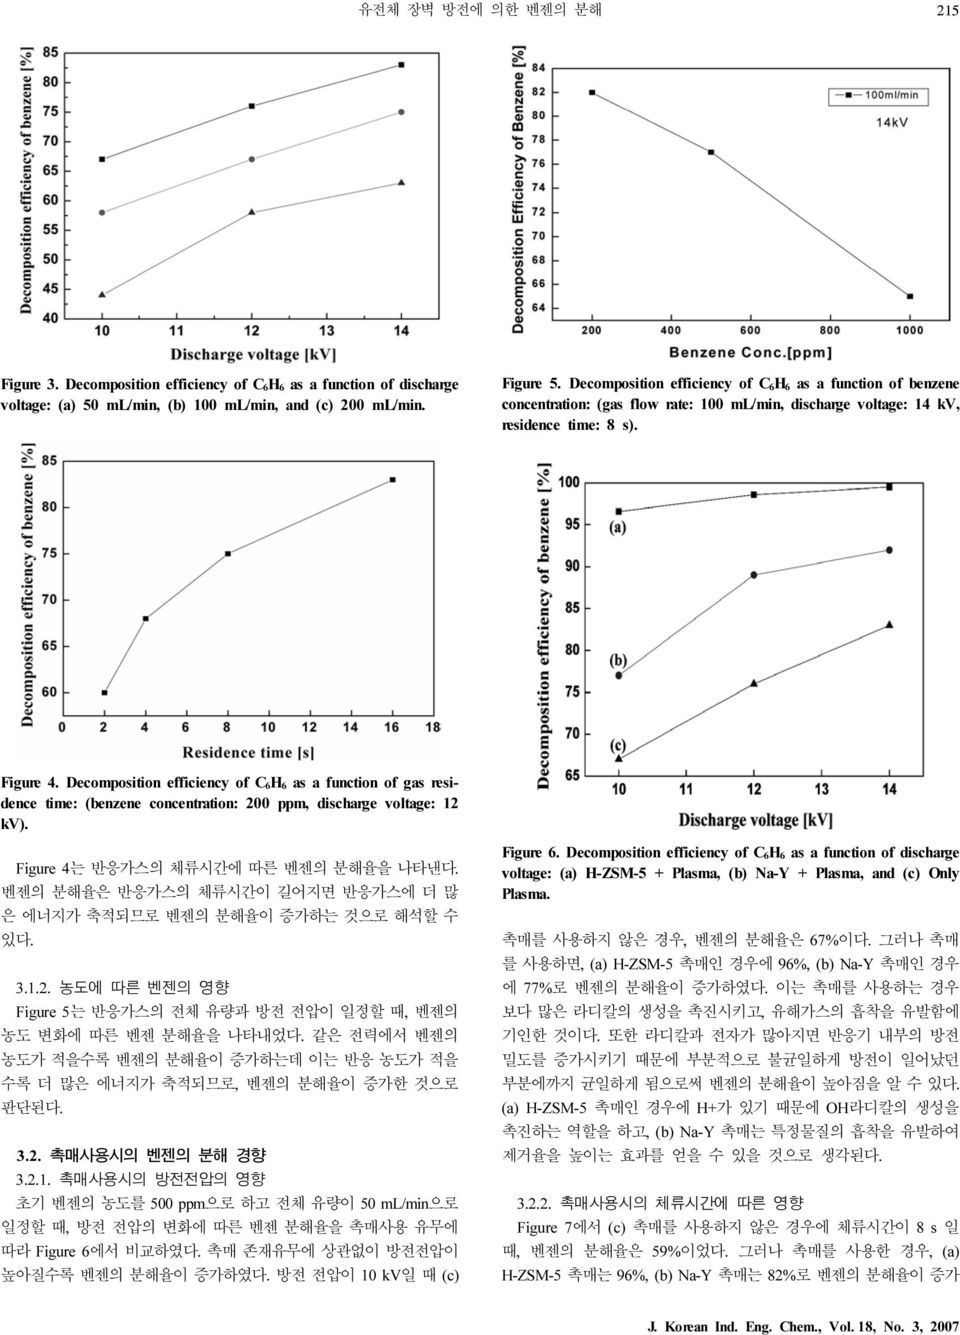 Decomposition efficiency of C 6H 6 as a function of gas residence time: (benzene concentration: 200 ppm, discharge voltage: 12 kv). Figure 4는 반응가스의 체류시간에 따른 벤젠의 분해율을 나타낸다.